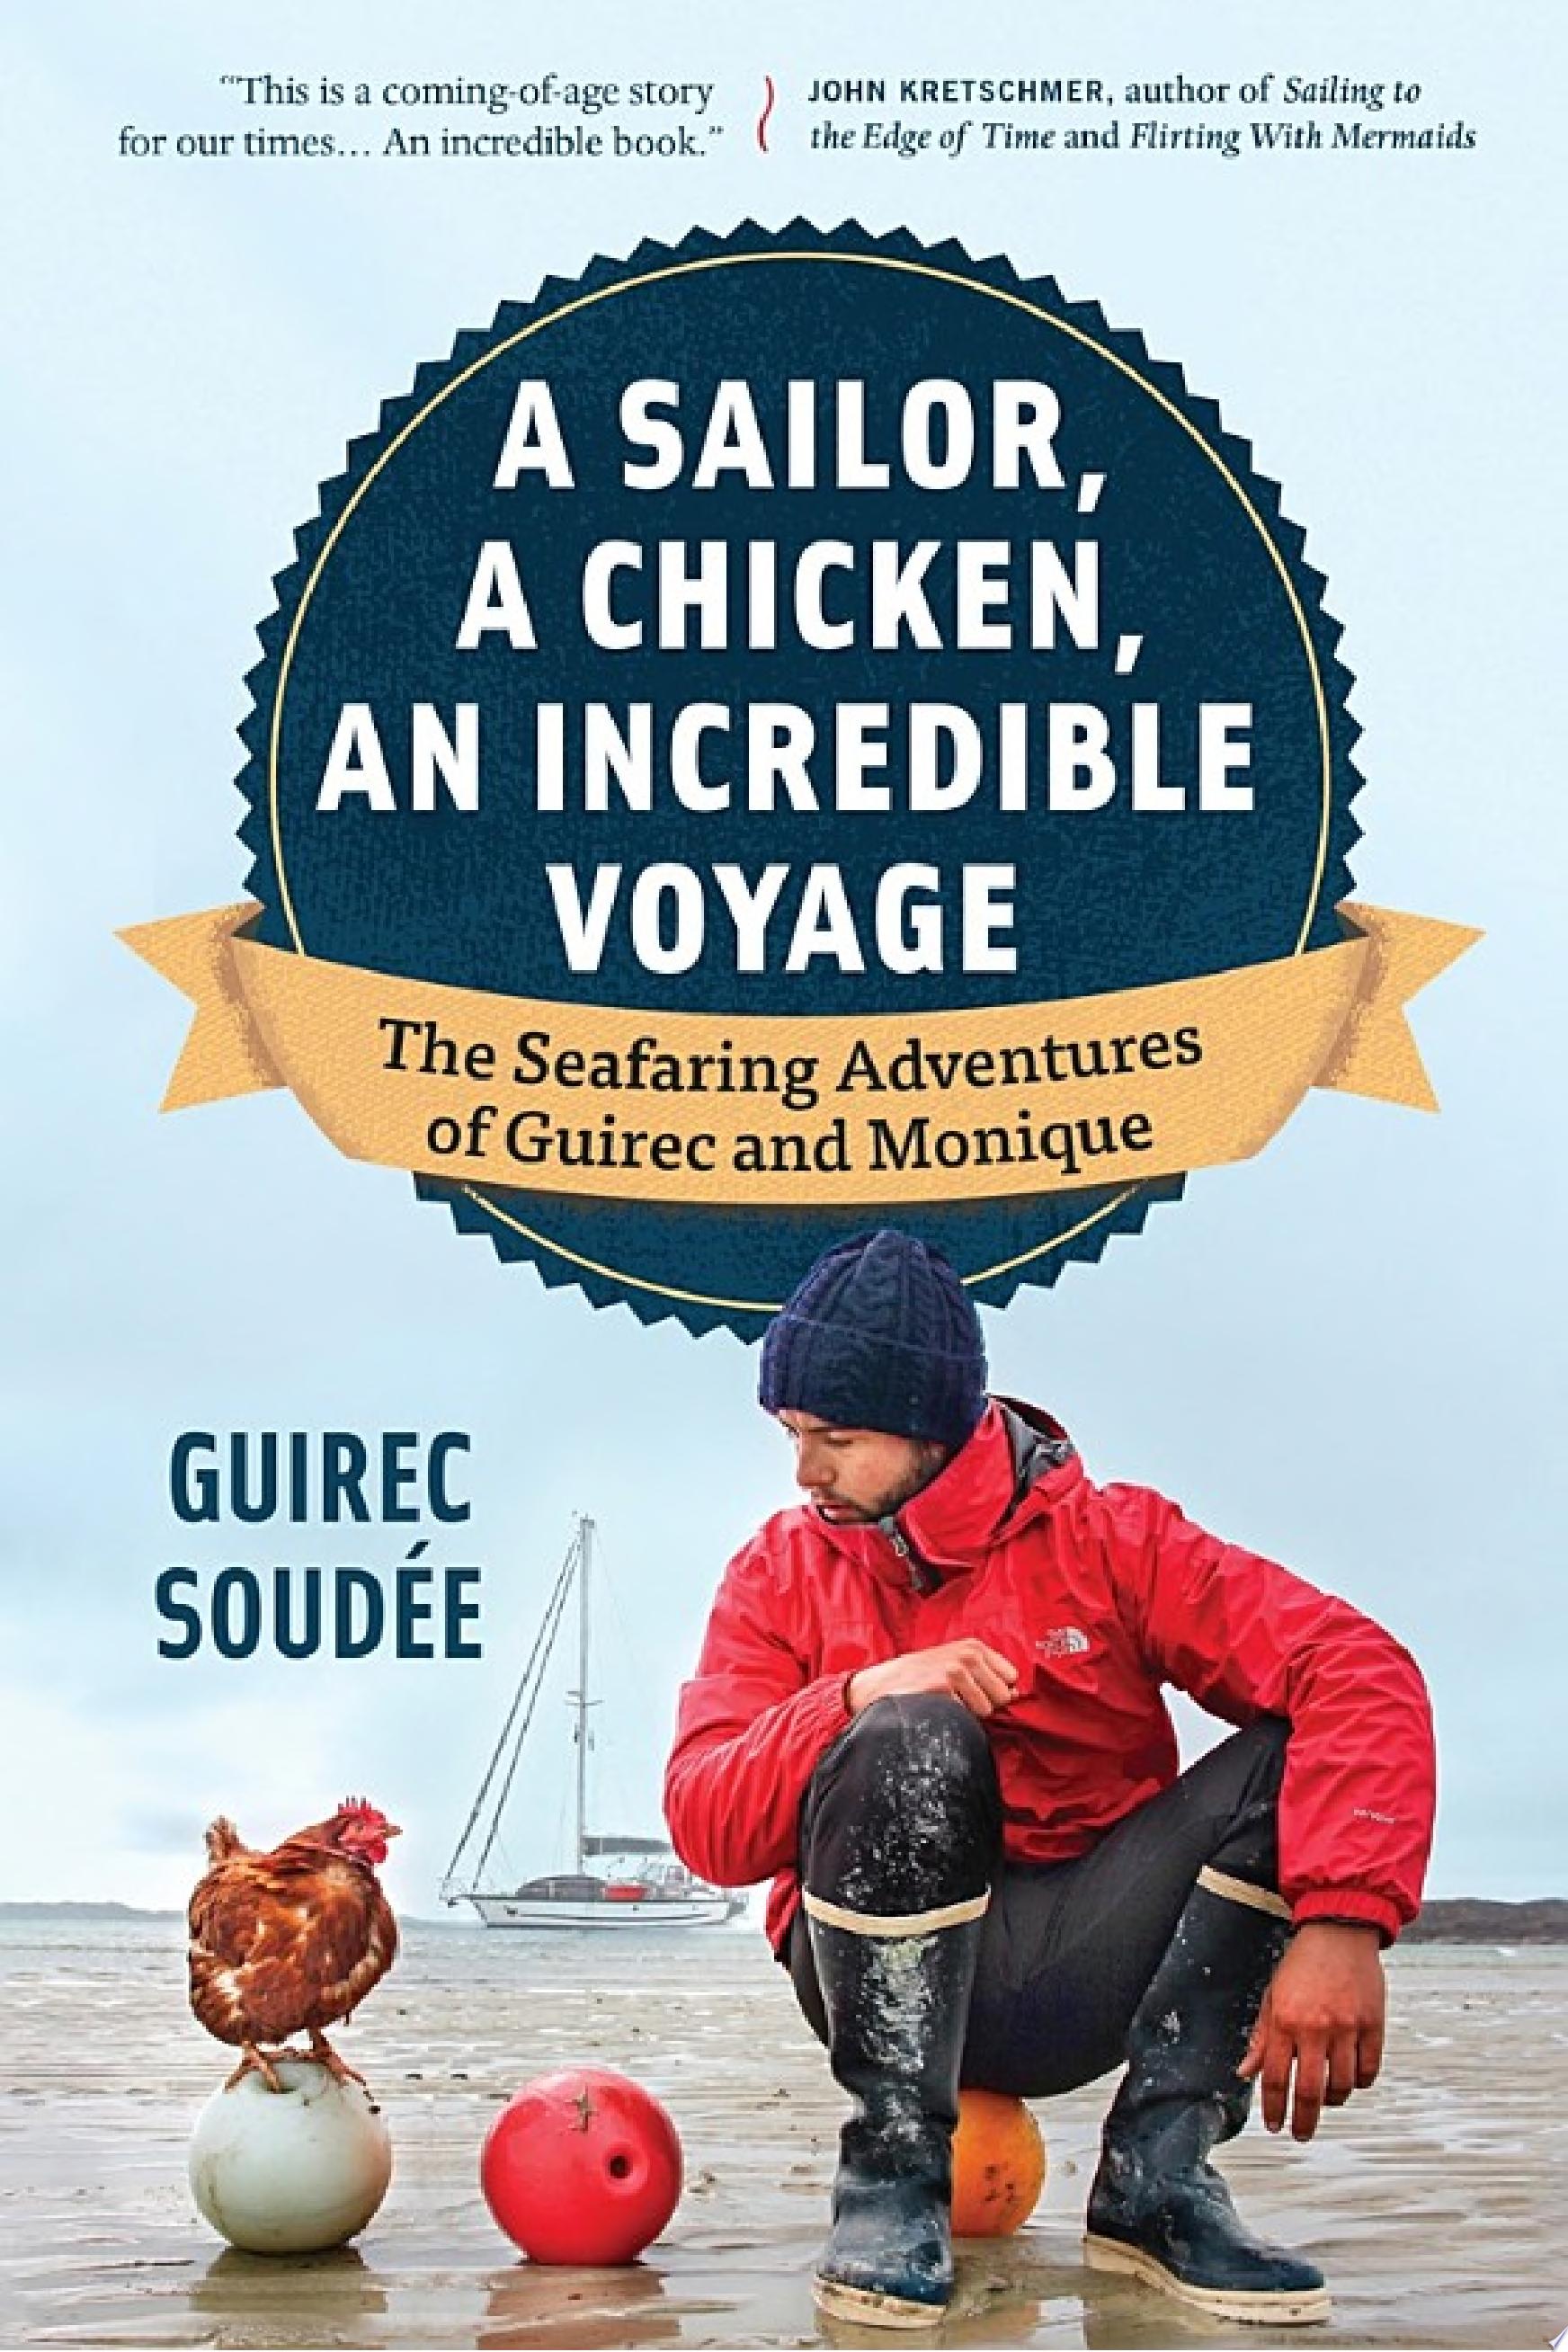 Image for "A Sailor, A Chicken, An Incredible Voyage"